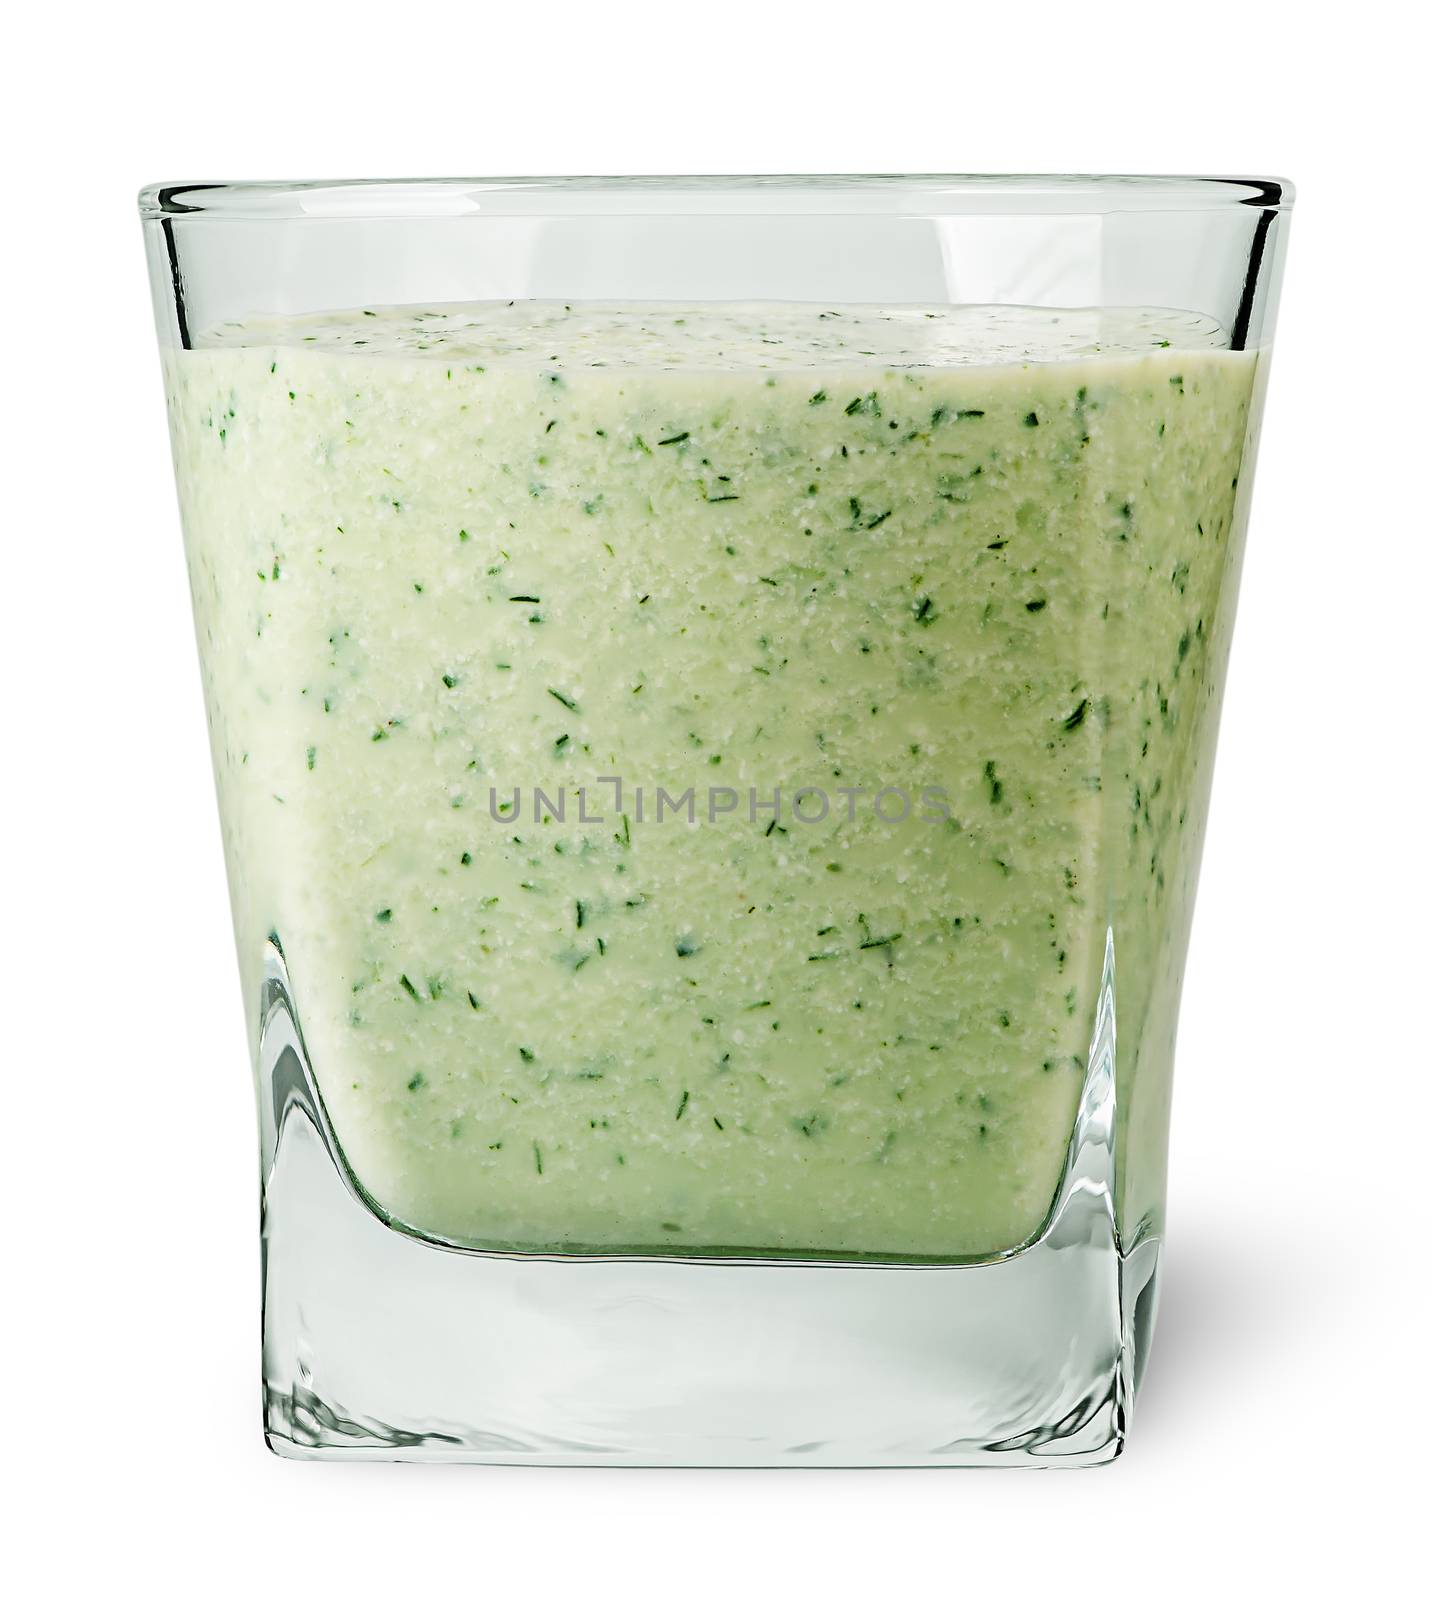 Cucumber smoothie in glass by Cipariss